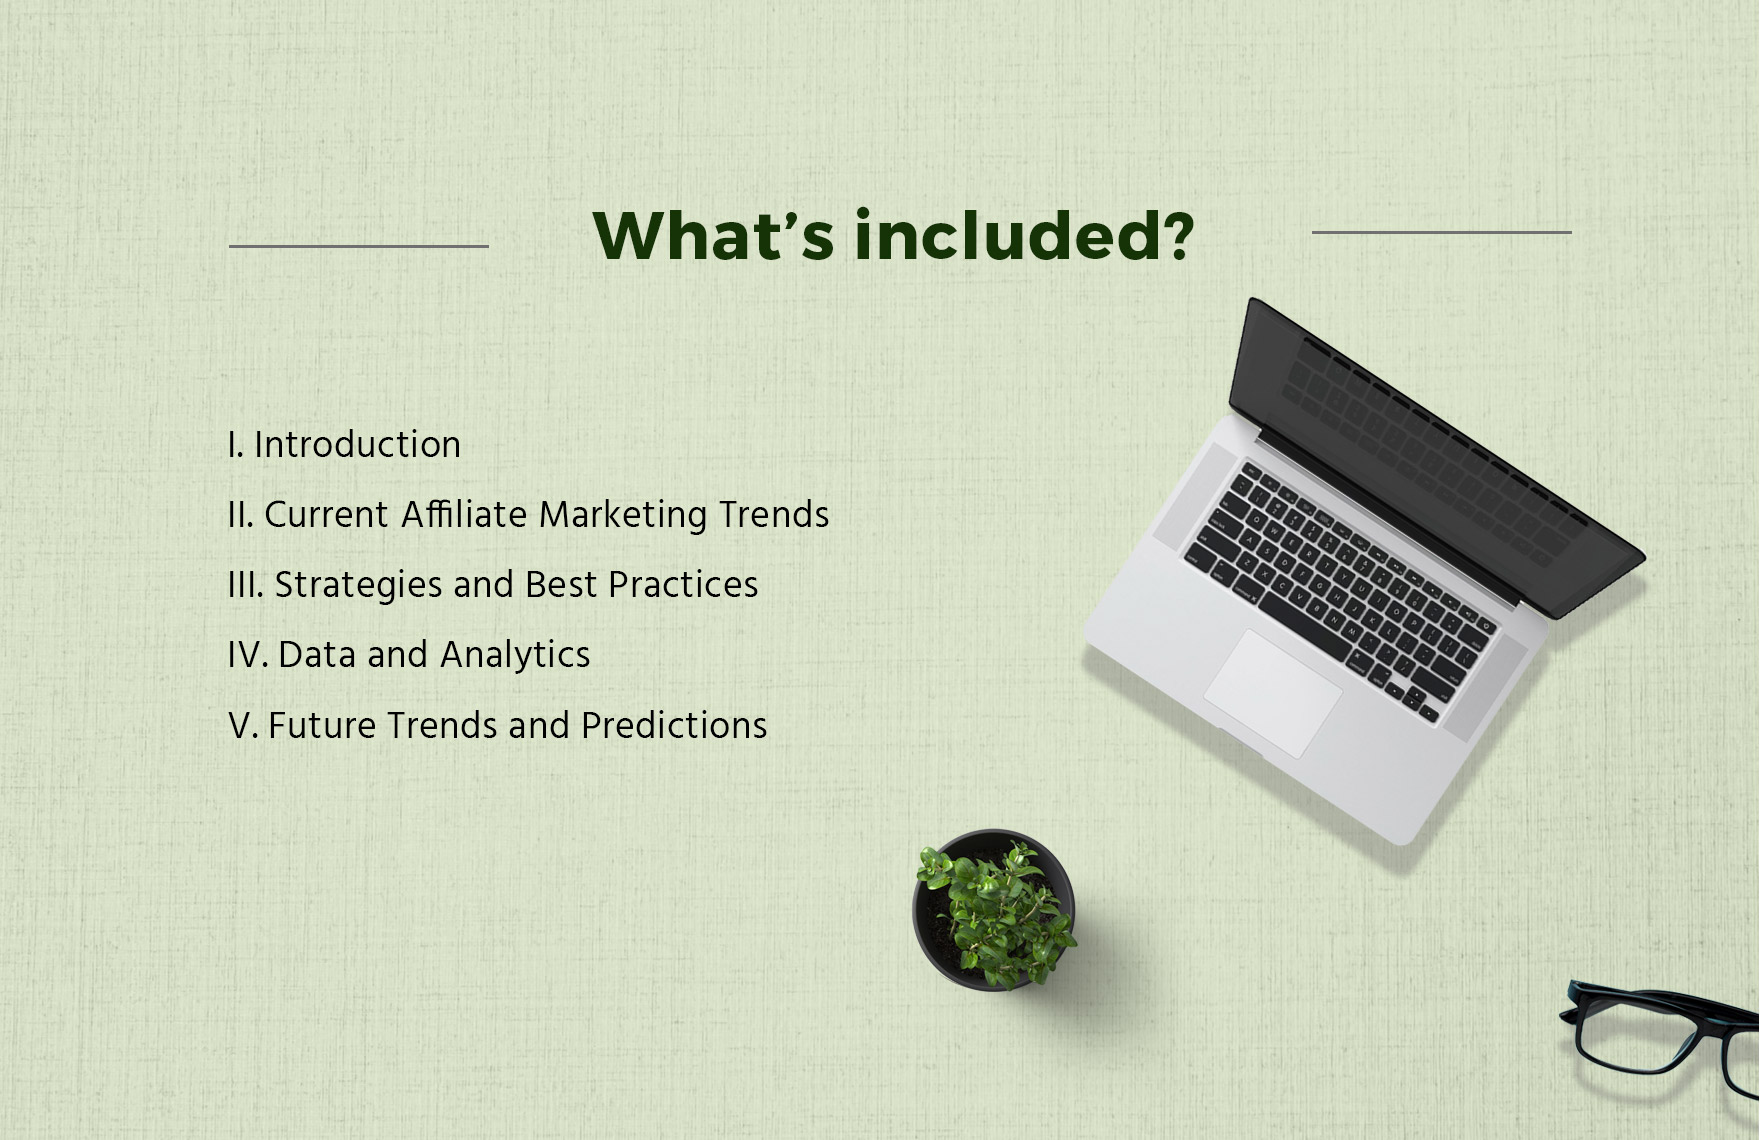  Journal of Affiliate Marketing Trends Template